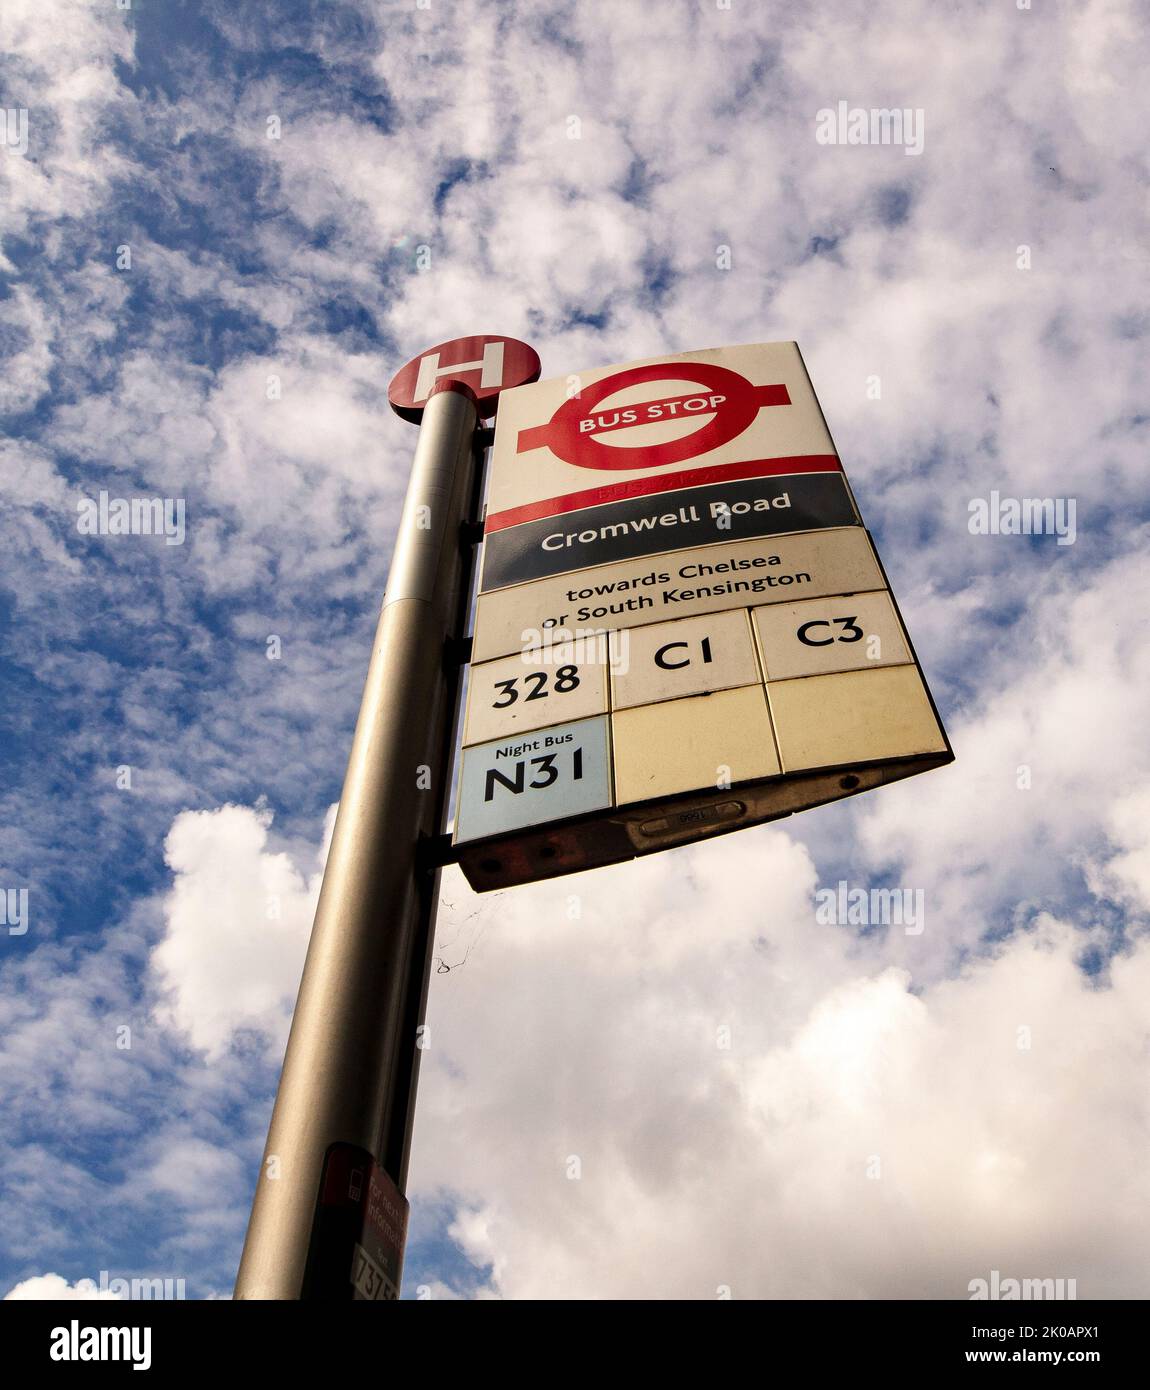 Bus stop sign, 'Cromwell Road', in Kensington, South West London against a dark blue cloudy sky Stock Photo